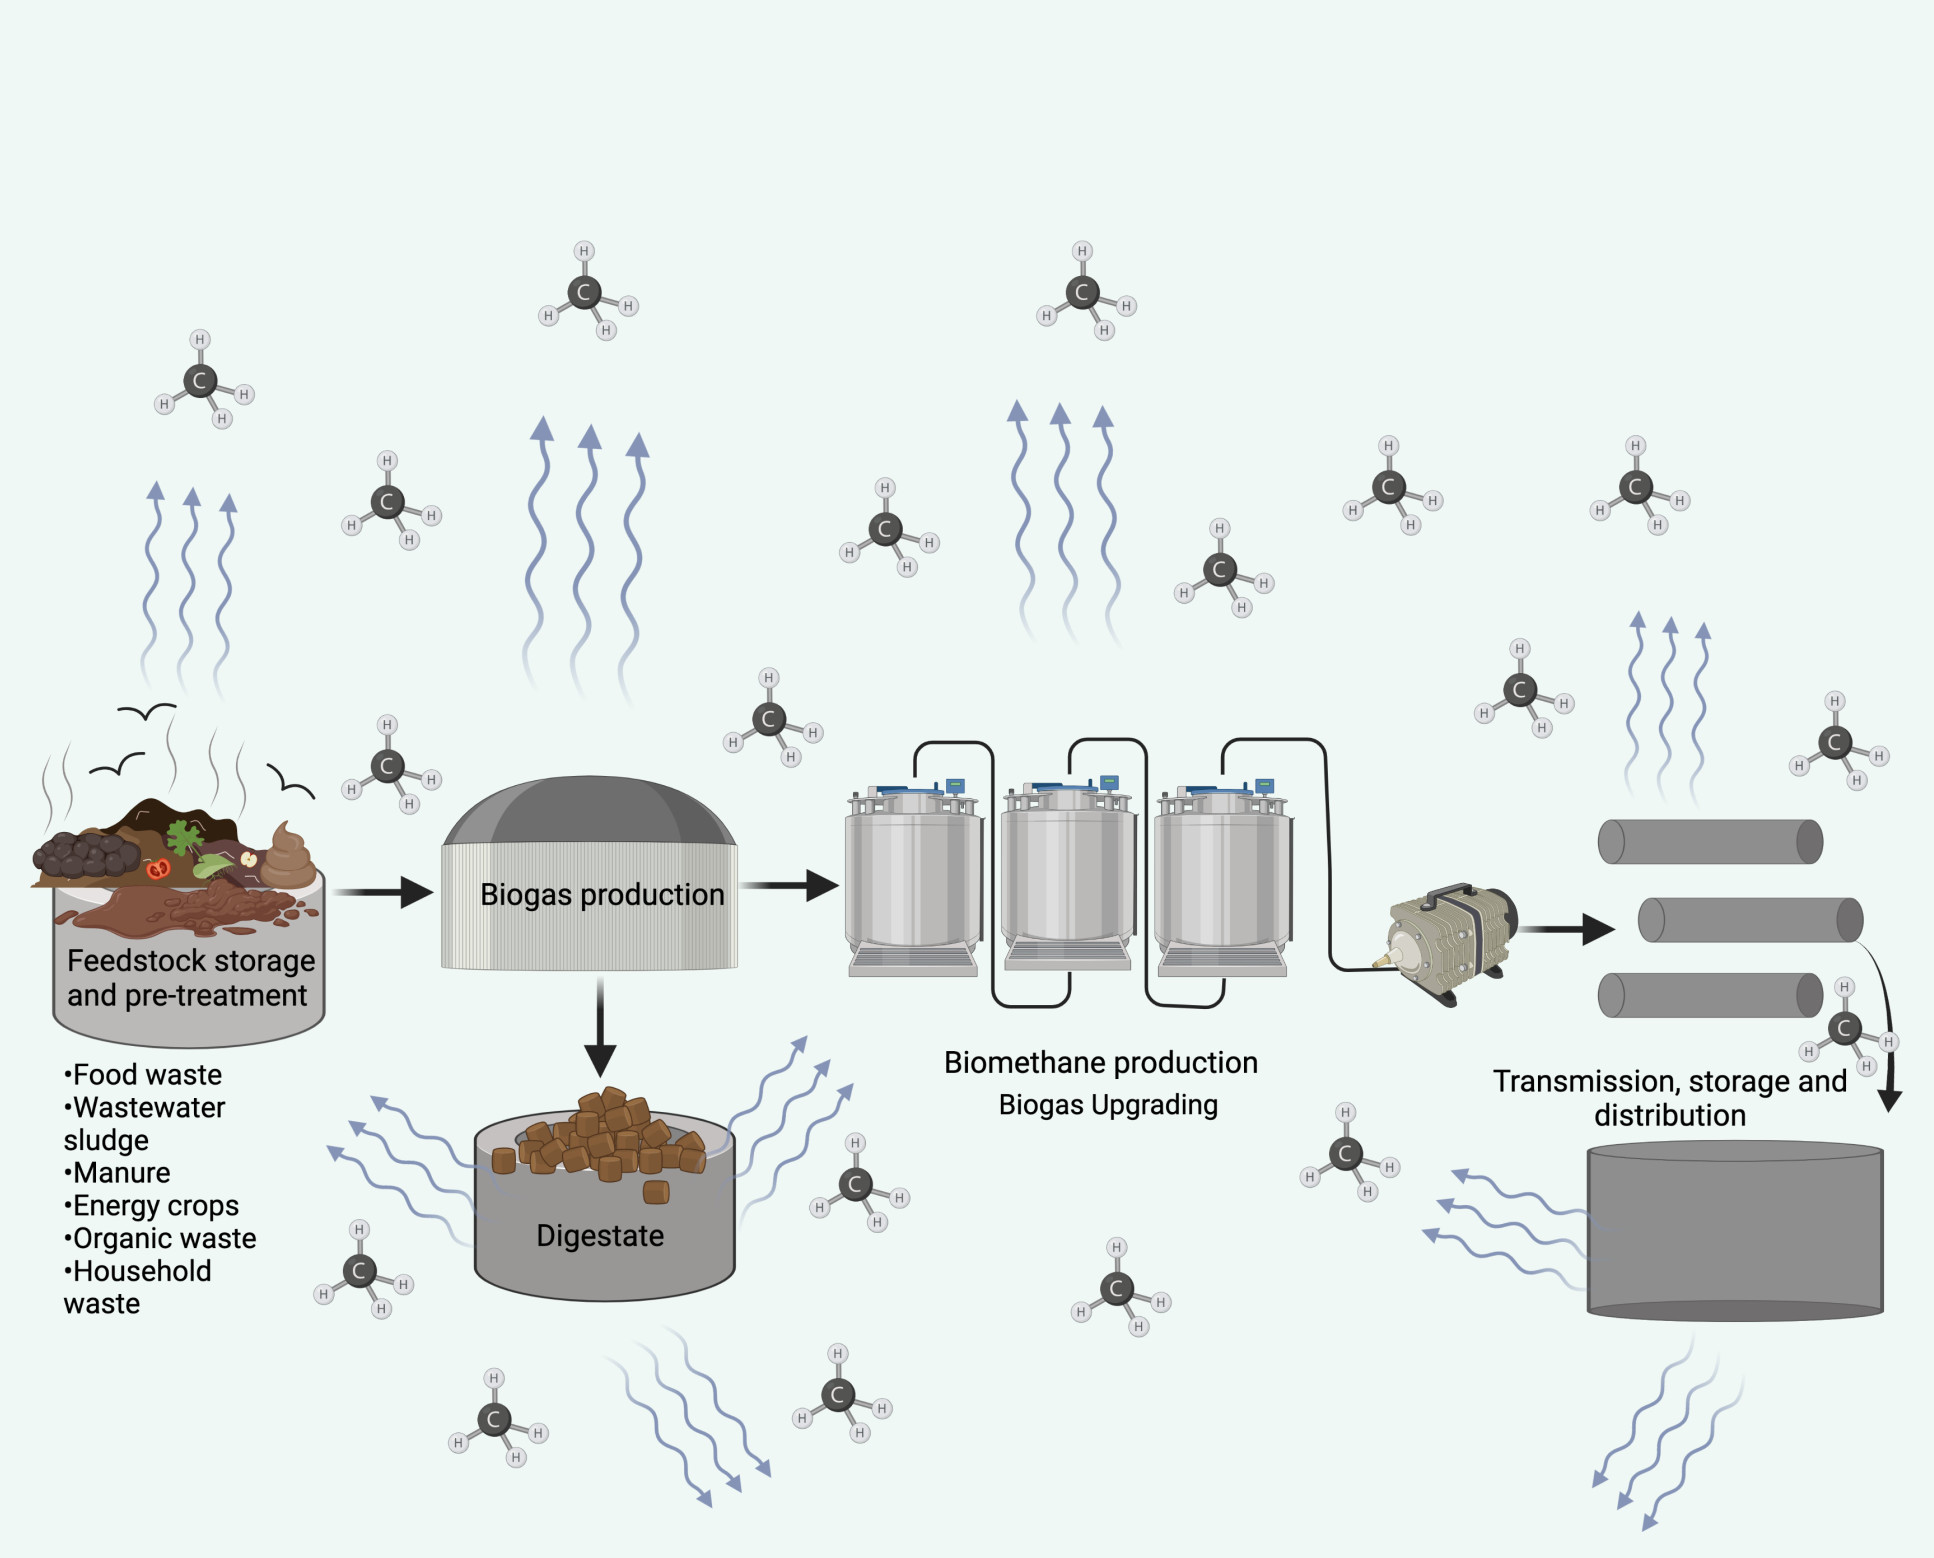 Graphical abstract depicting the biogas and biomethane supply chain and its leaky areas